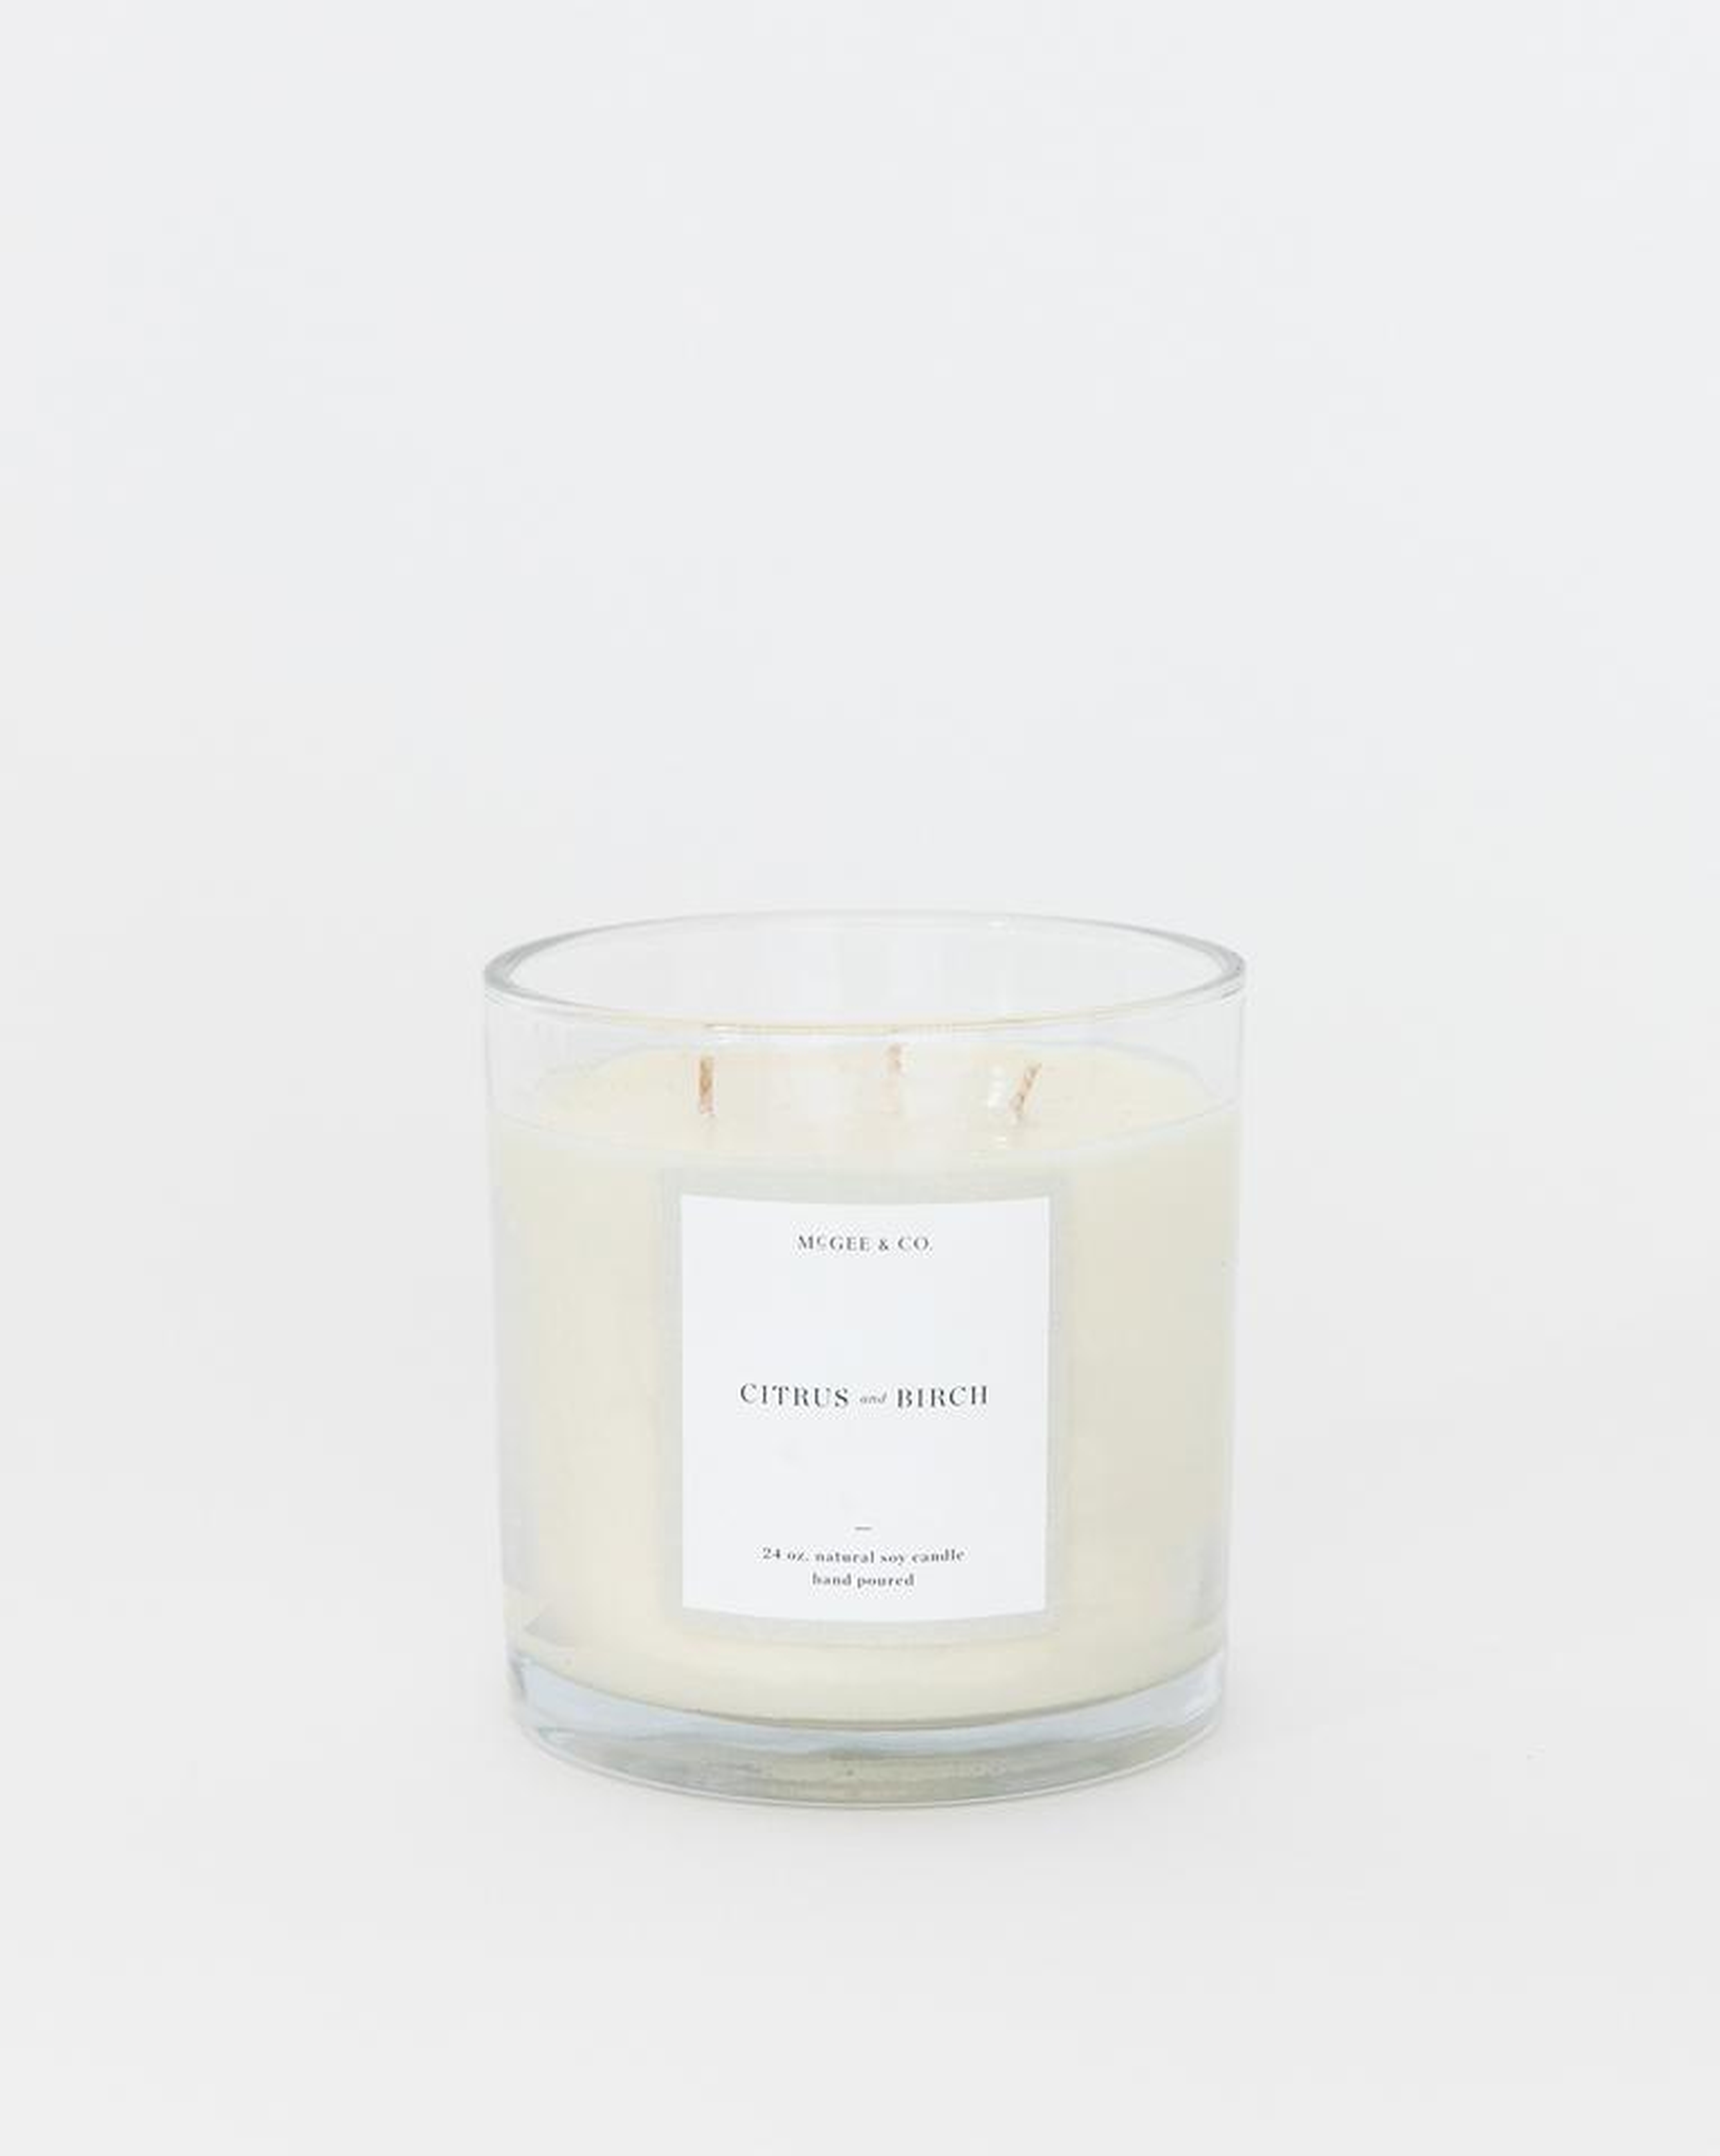 CITRUS + BIRCH CANDLE - McGee & Co.